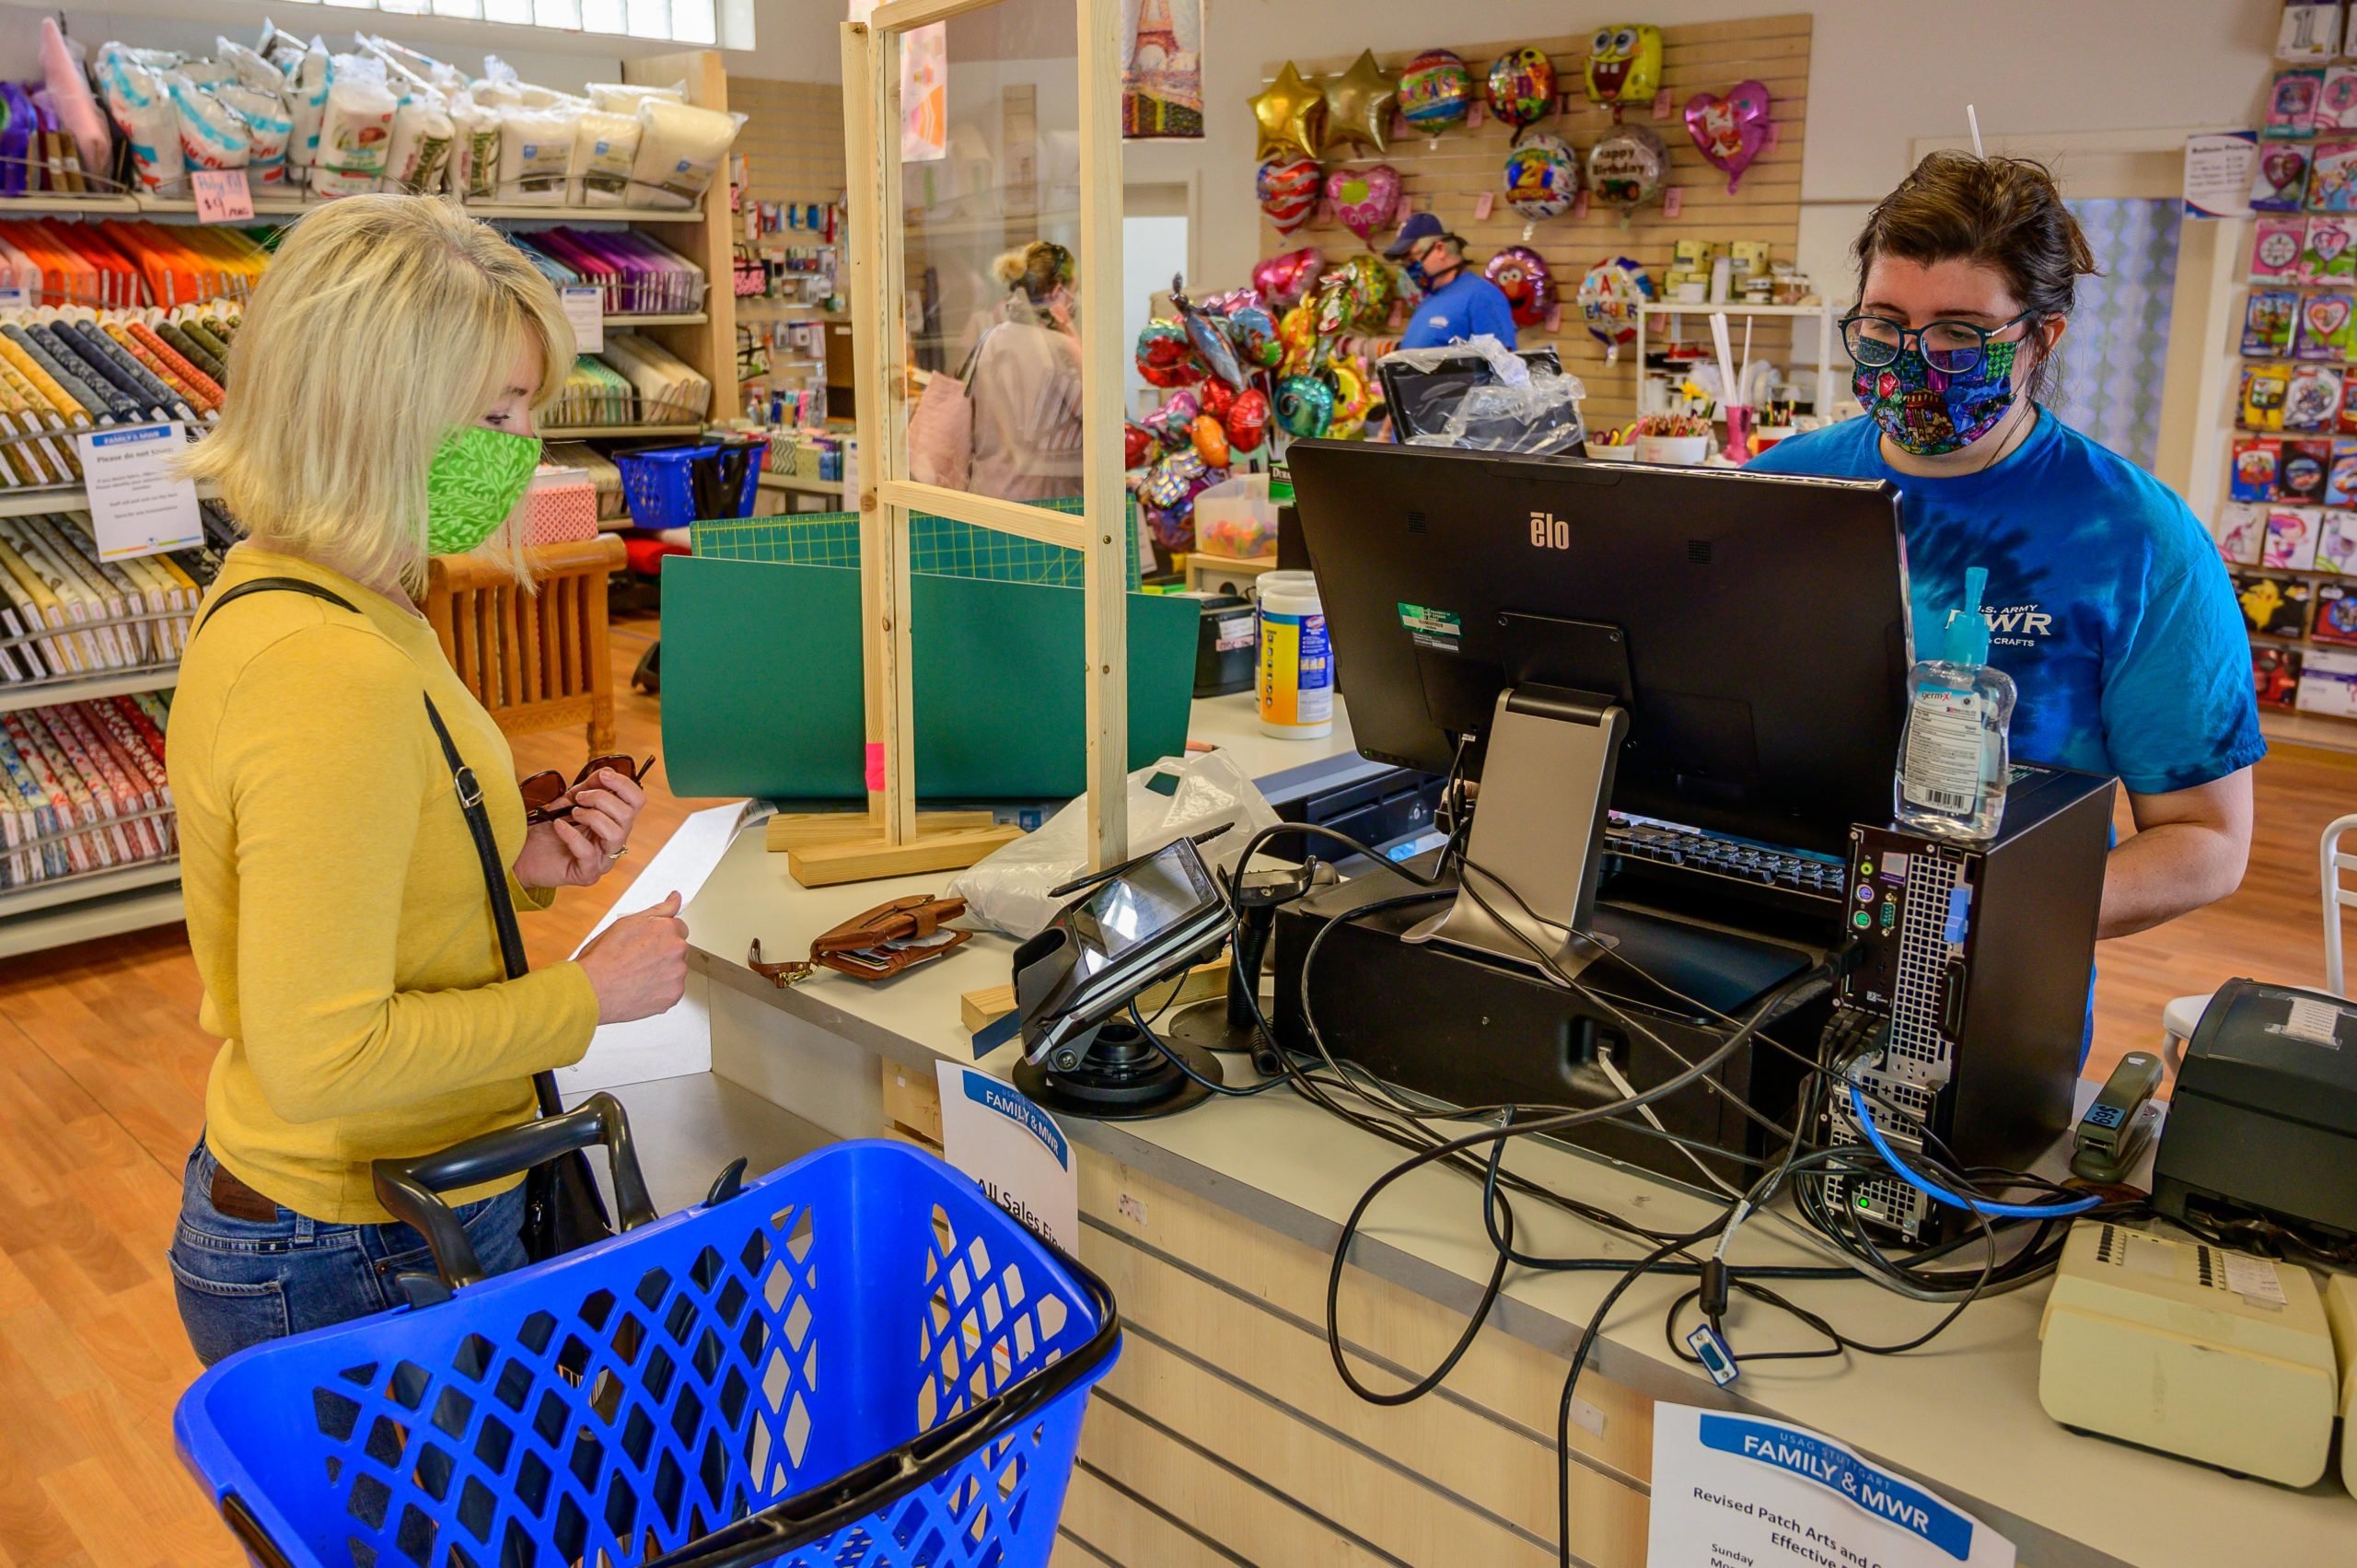 A customer buys art supplies at the Arts and crafts center